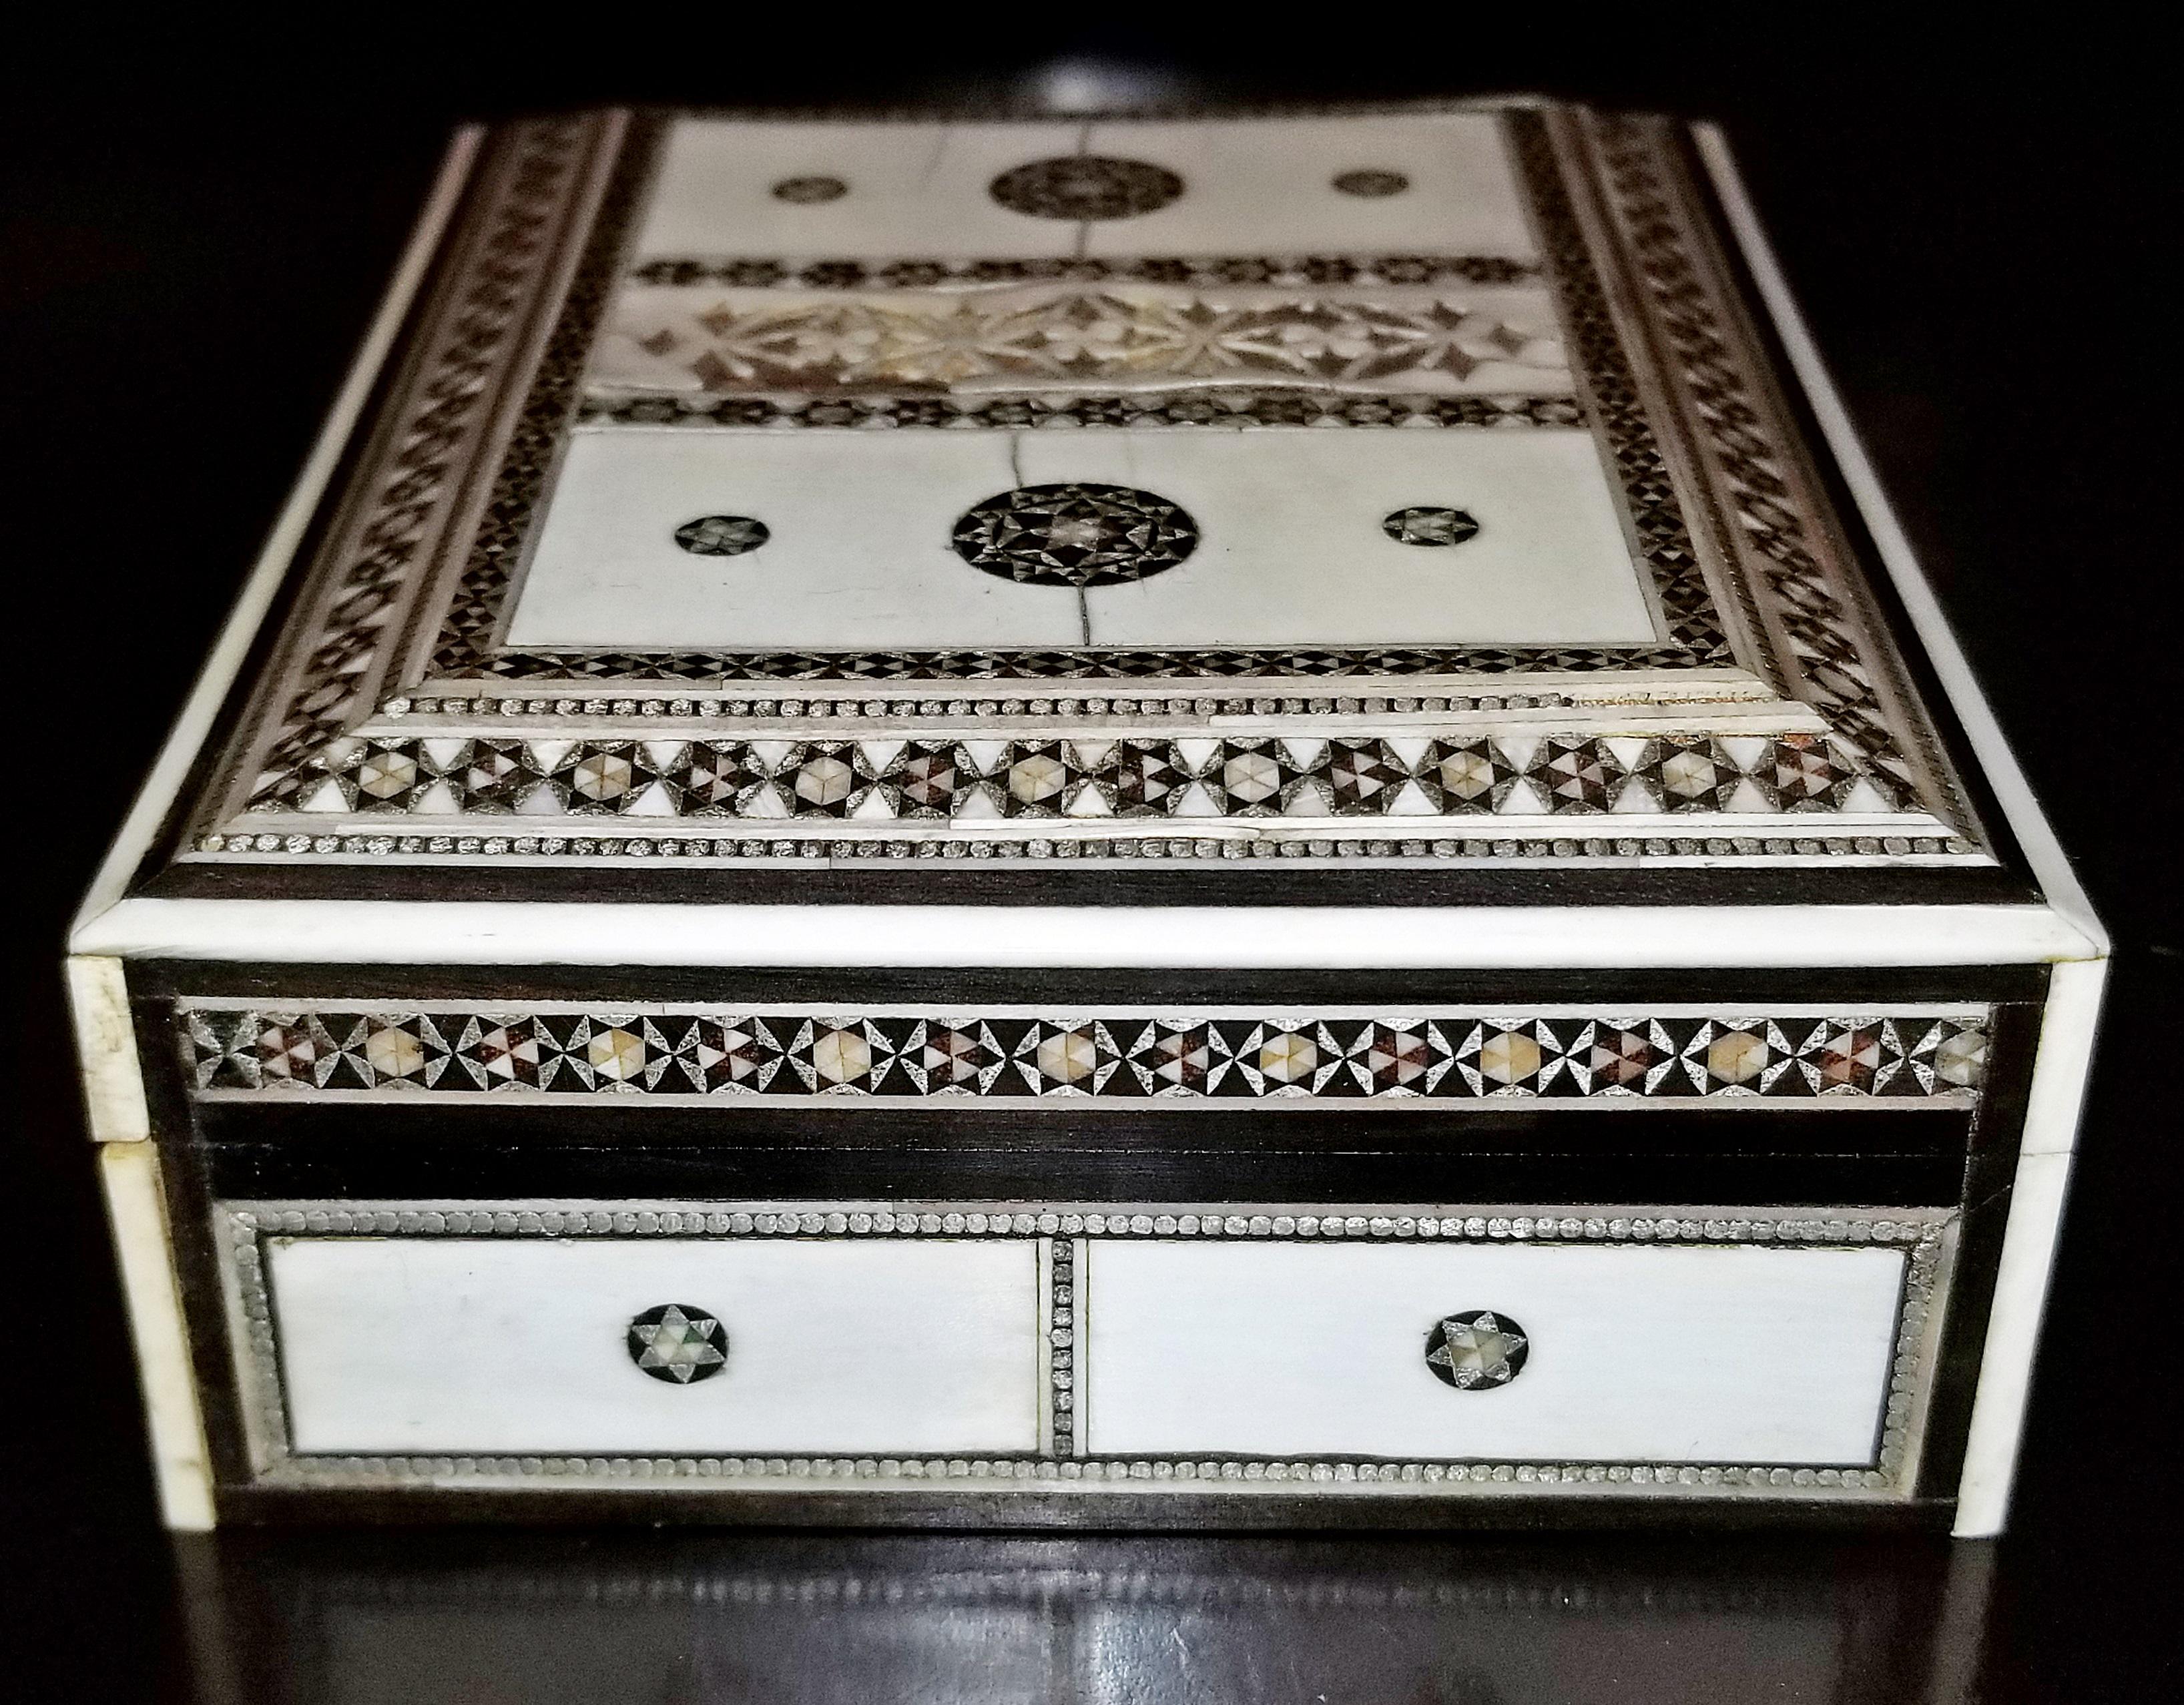 Gorgeous pair of 19th century Anglo-Indian ……. matching trinket boxes.

Made in Vizagapatam, India, circa 1870.

The boxes are made of sandalwood and covered in faux ivory or bone, mother of pearl and ebony stringing.

The boxes are also